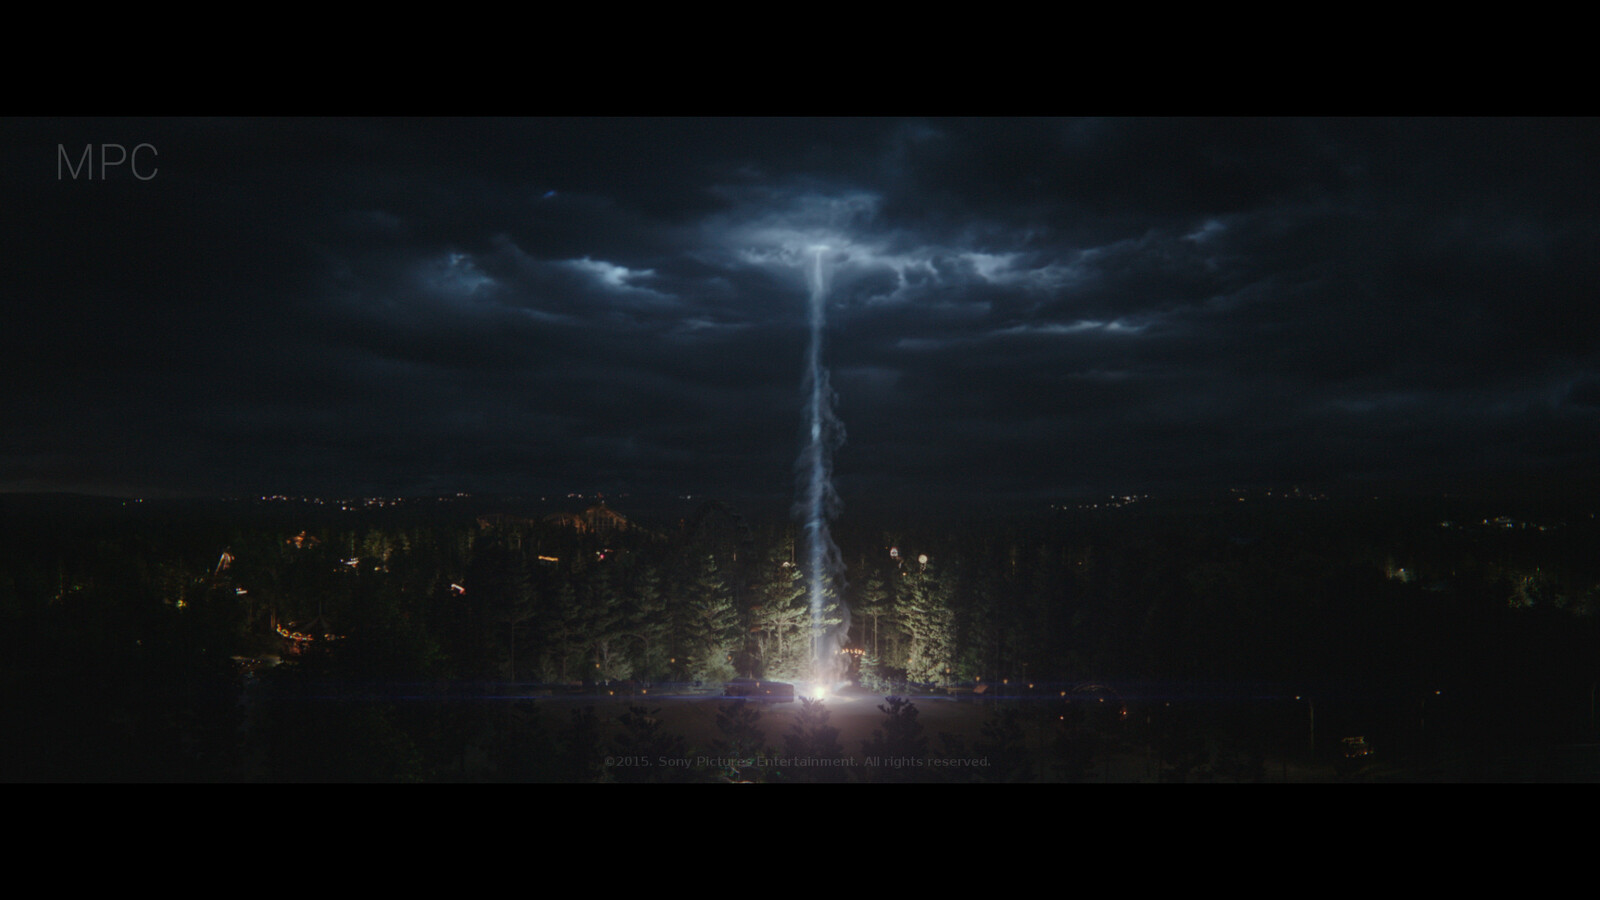 Tasked with sky, lightning elements, and distant fairground matte painting